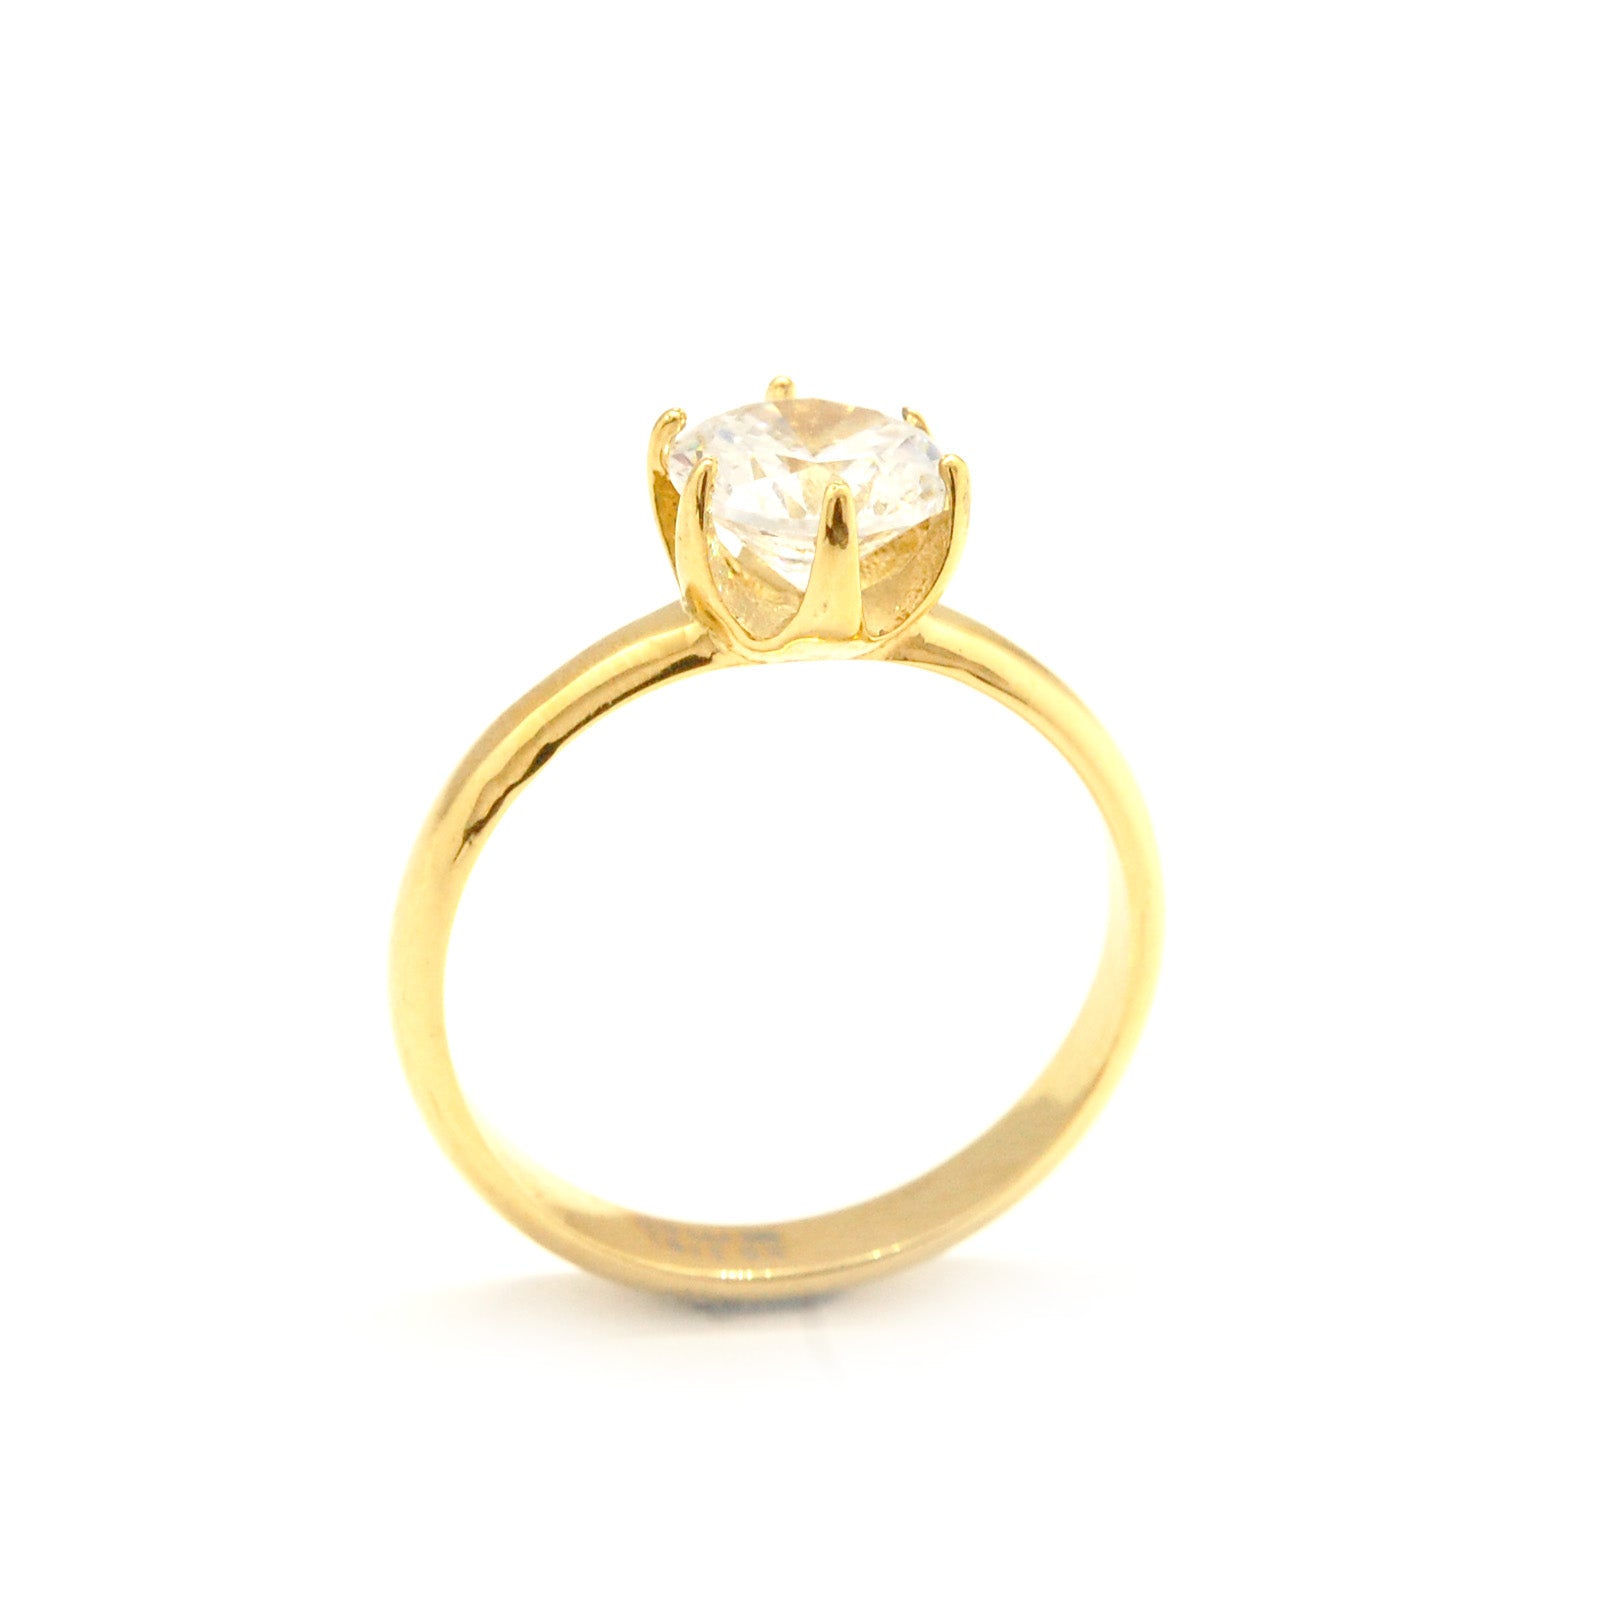 ESR 7810: Layla 1-Carat 6-Prong Solitaire Ring w/ Gold-Plated Band